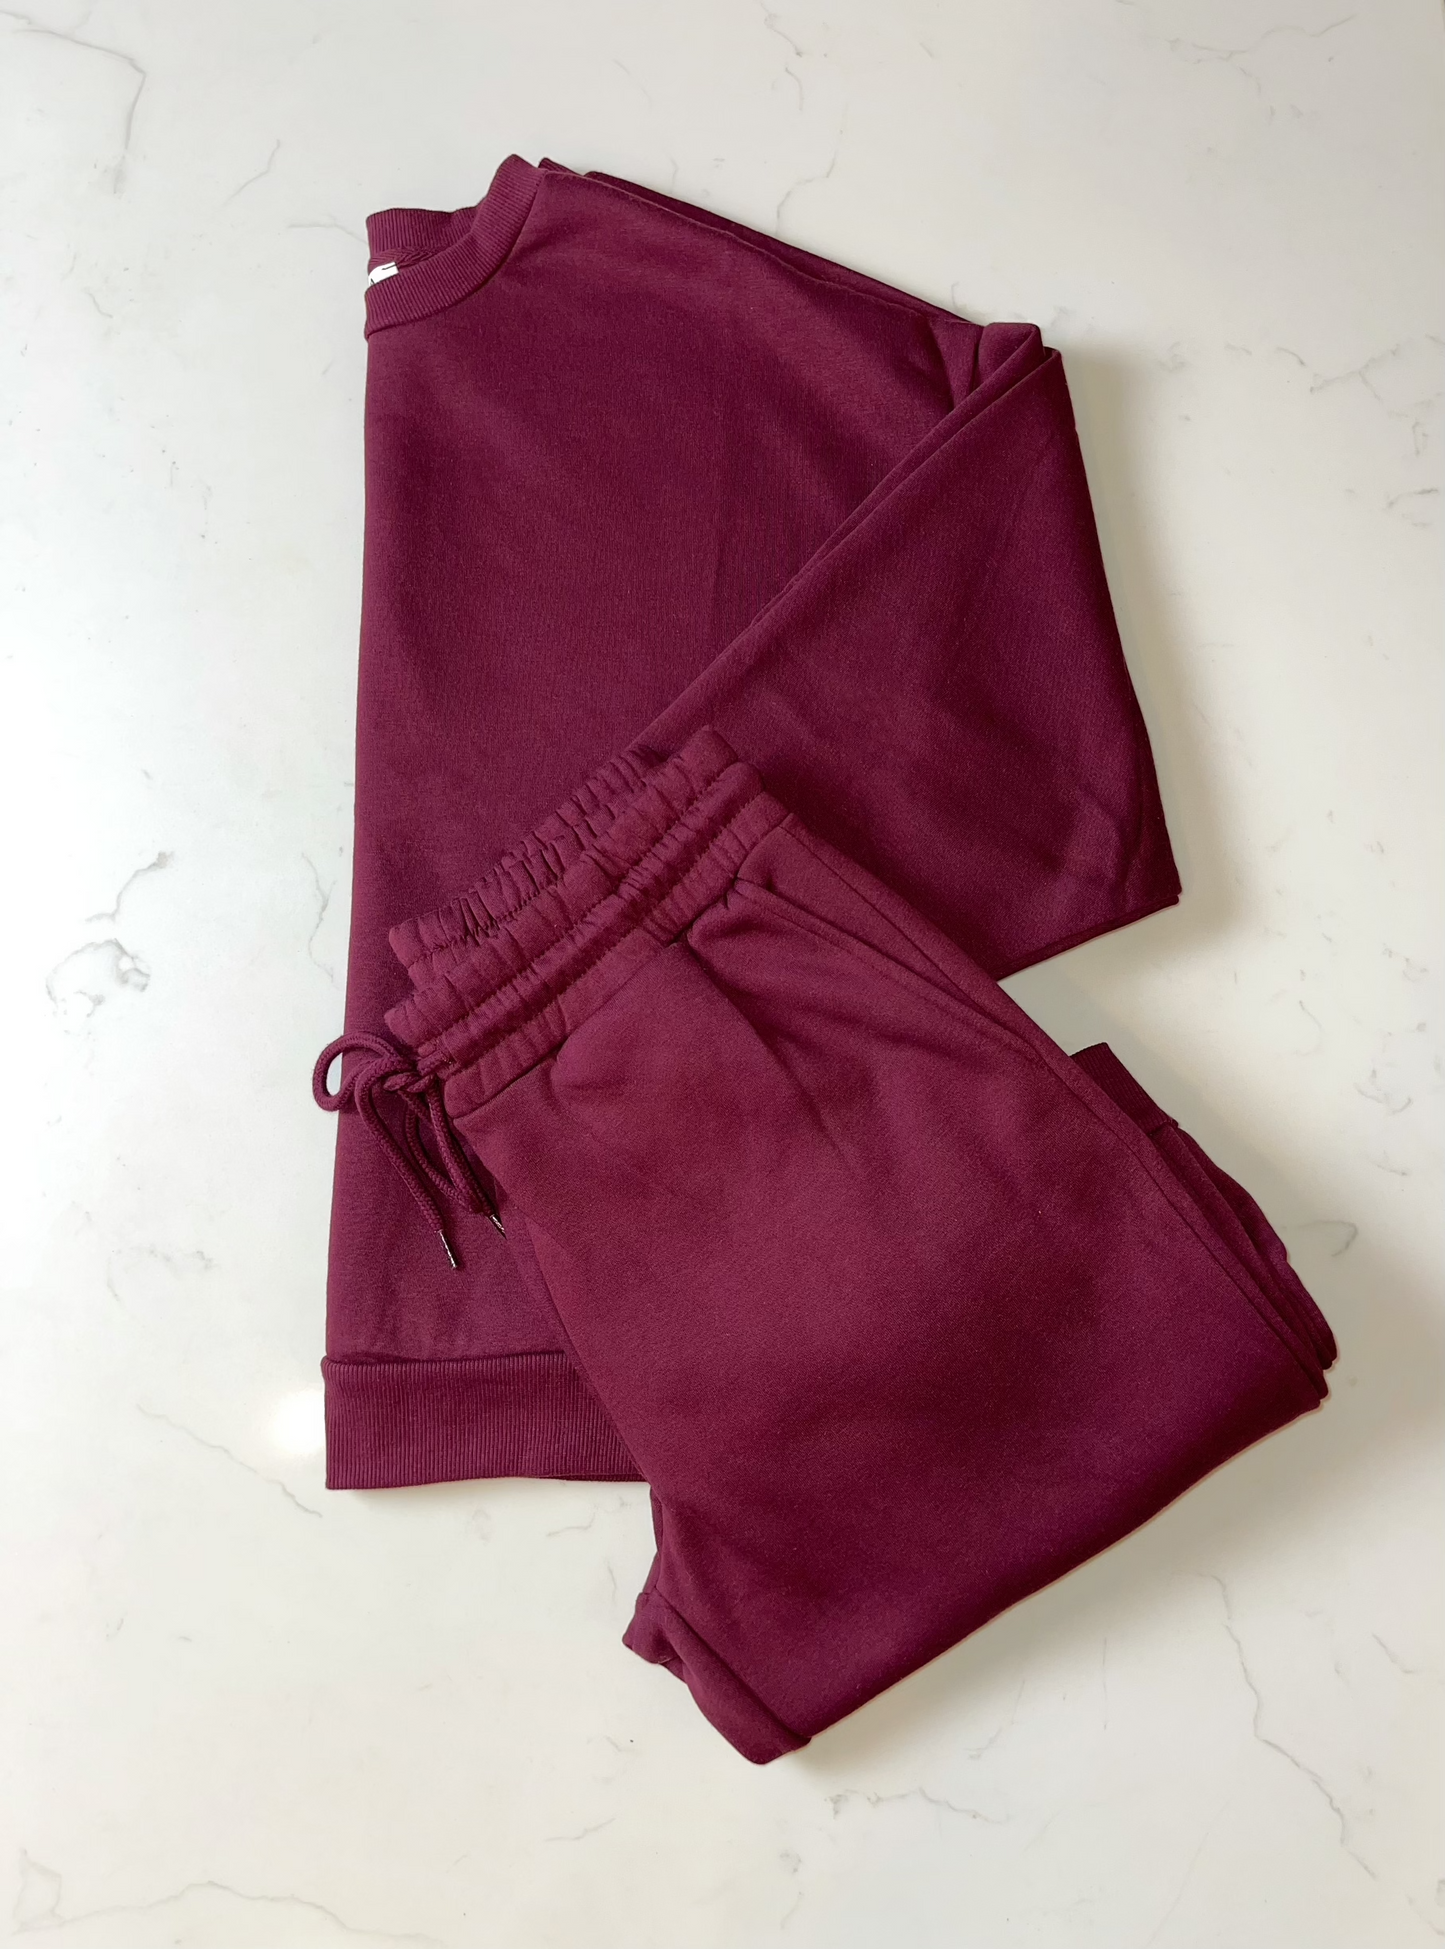 Double Take Jogger Set (Burgundy) Pre-Order - The Signature Fit